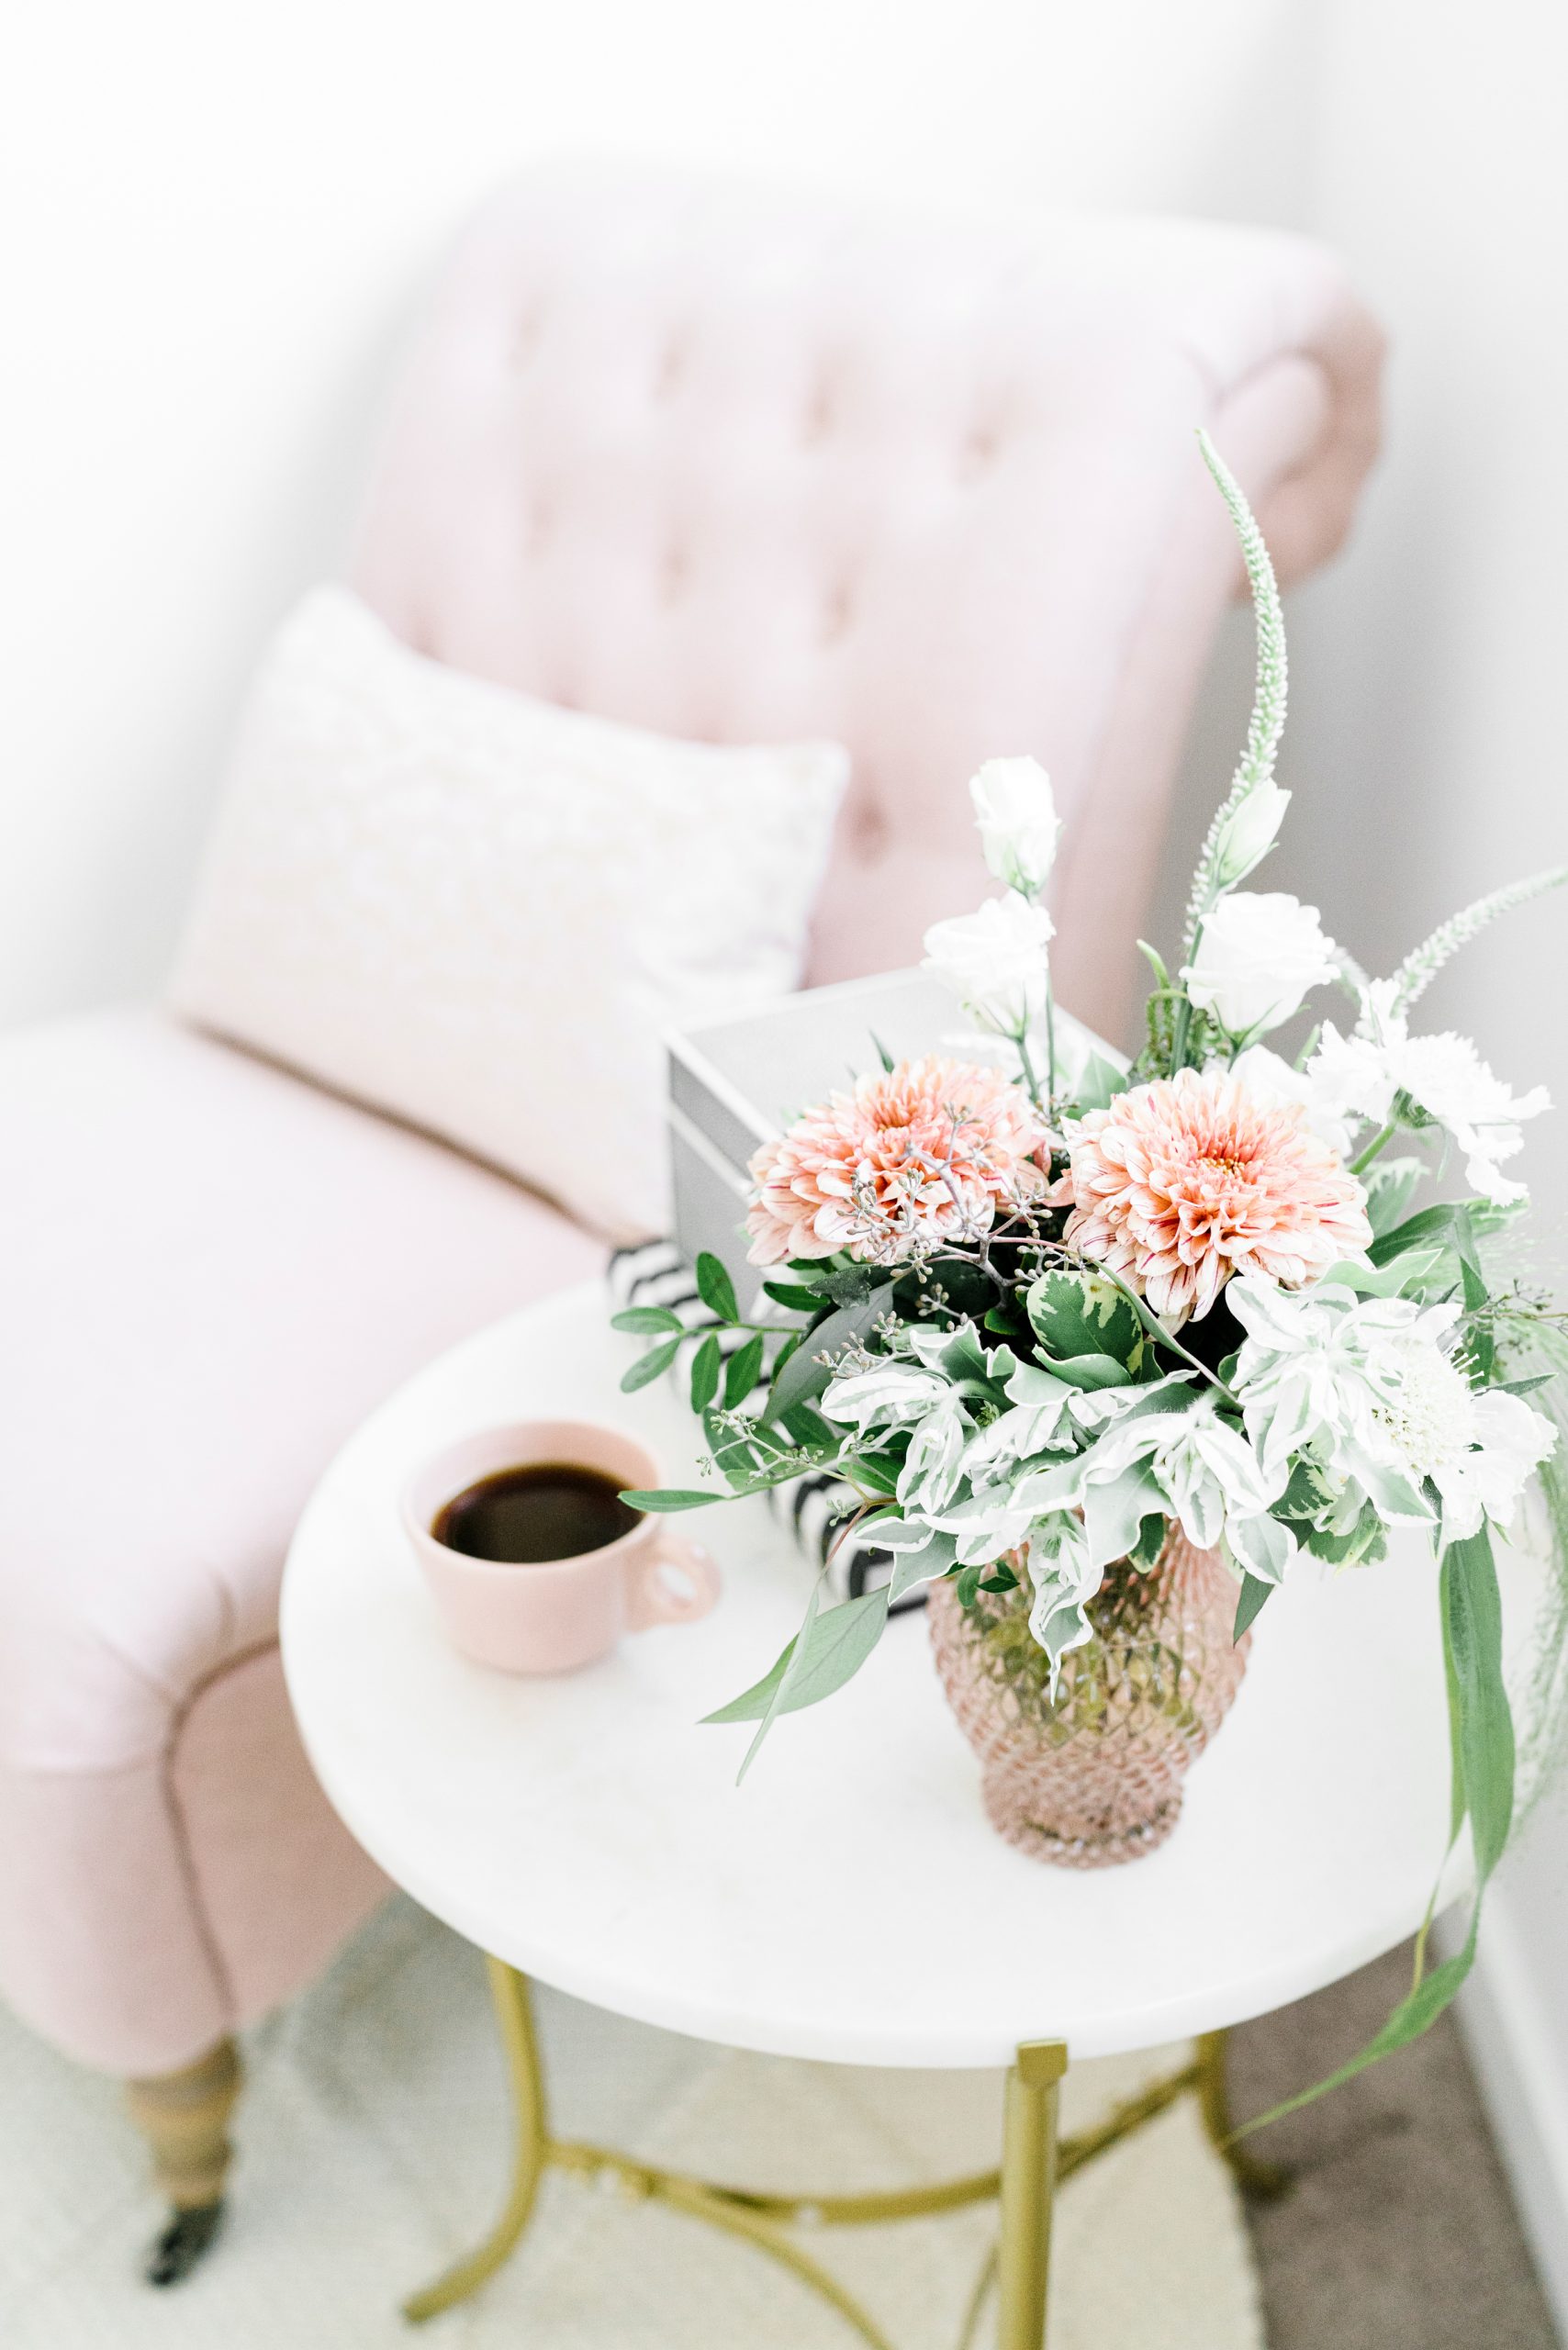 end table with flowers and coffee cup next to a cozy chair